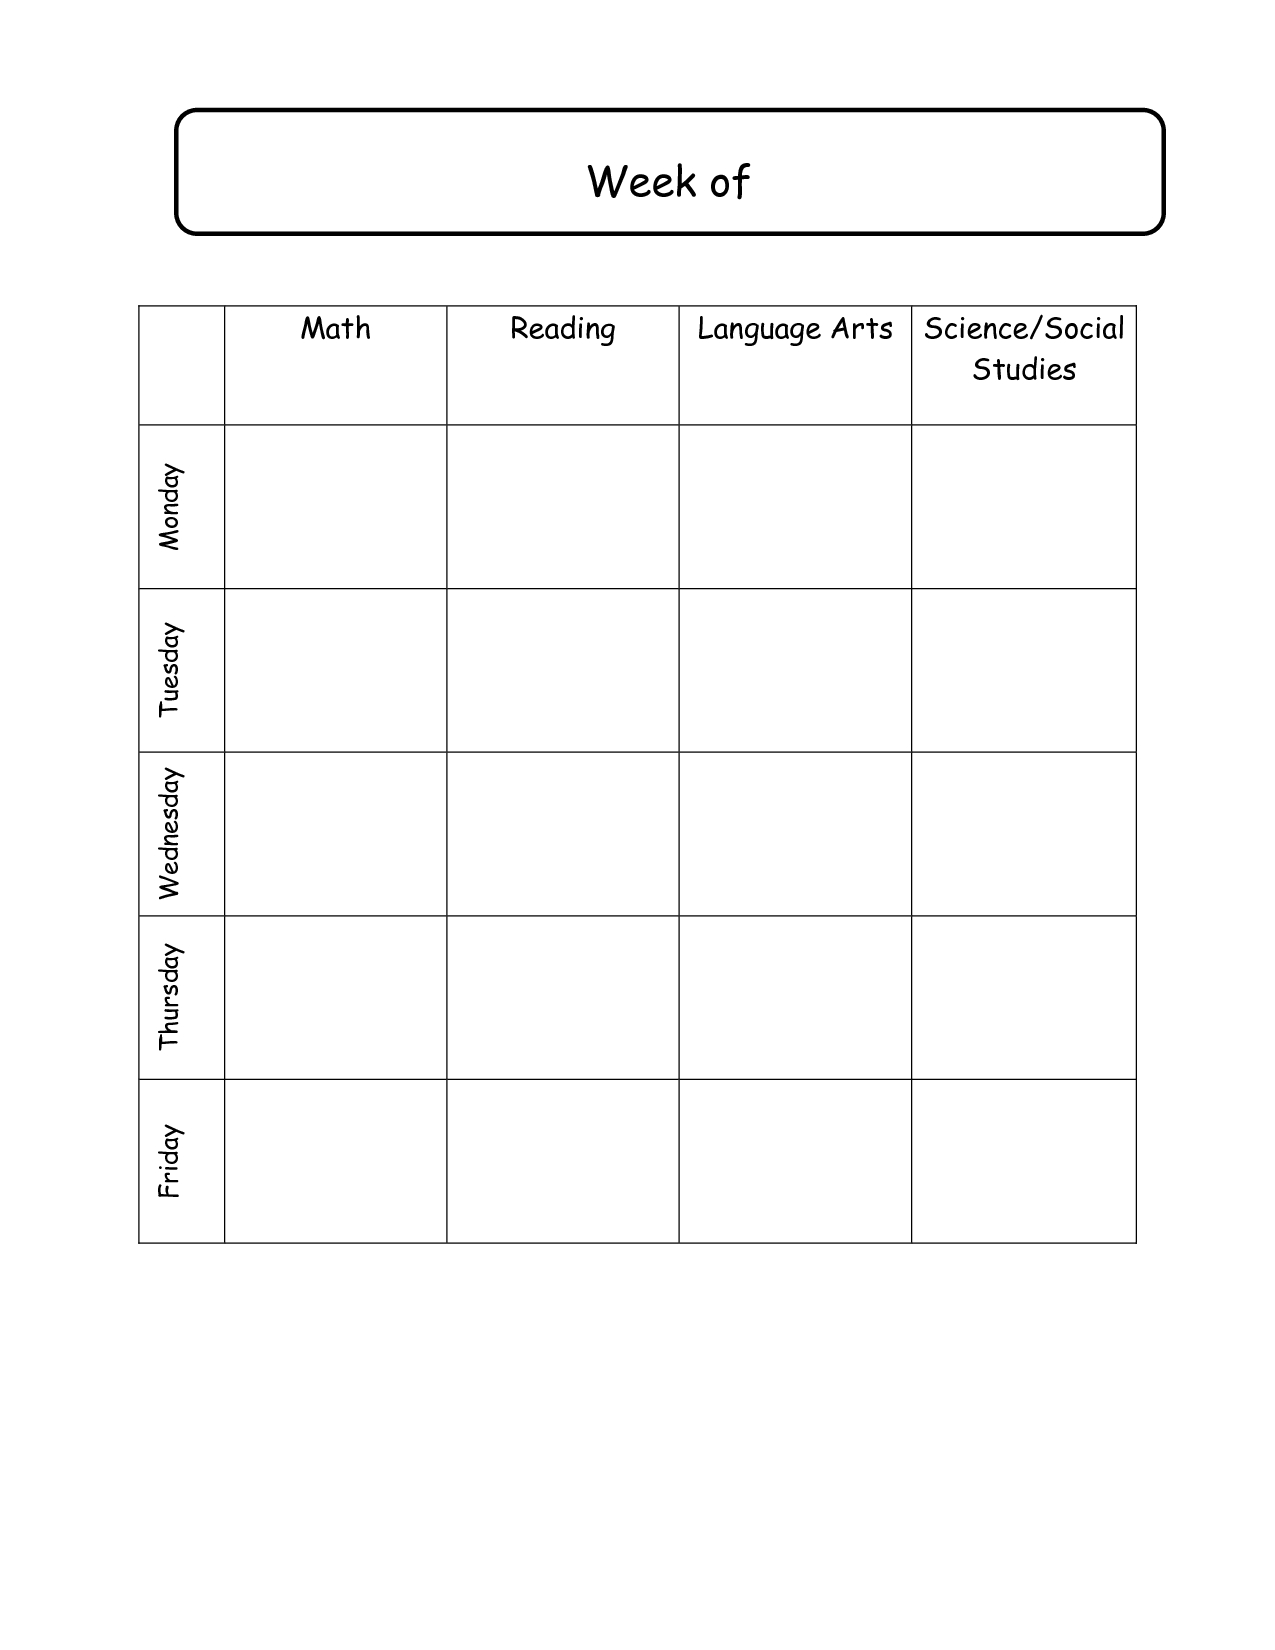 Elementary School Daily Schedule Template | Weekly Lesson-Calendar Lesson Plan Template